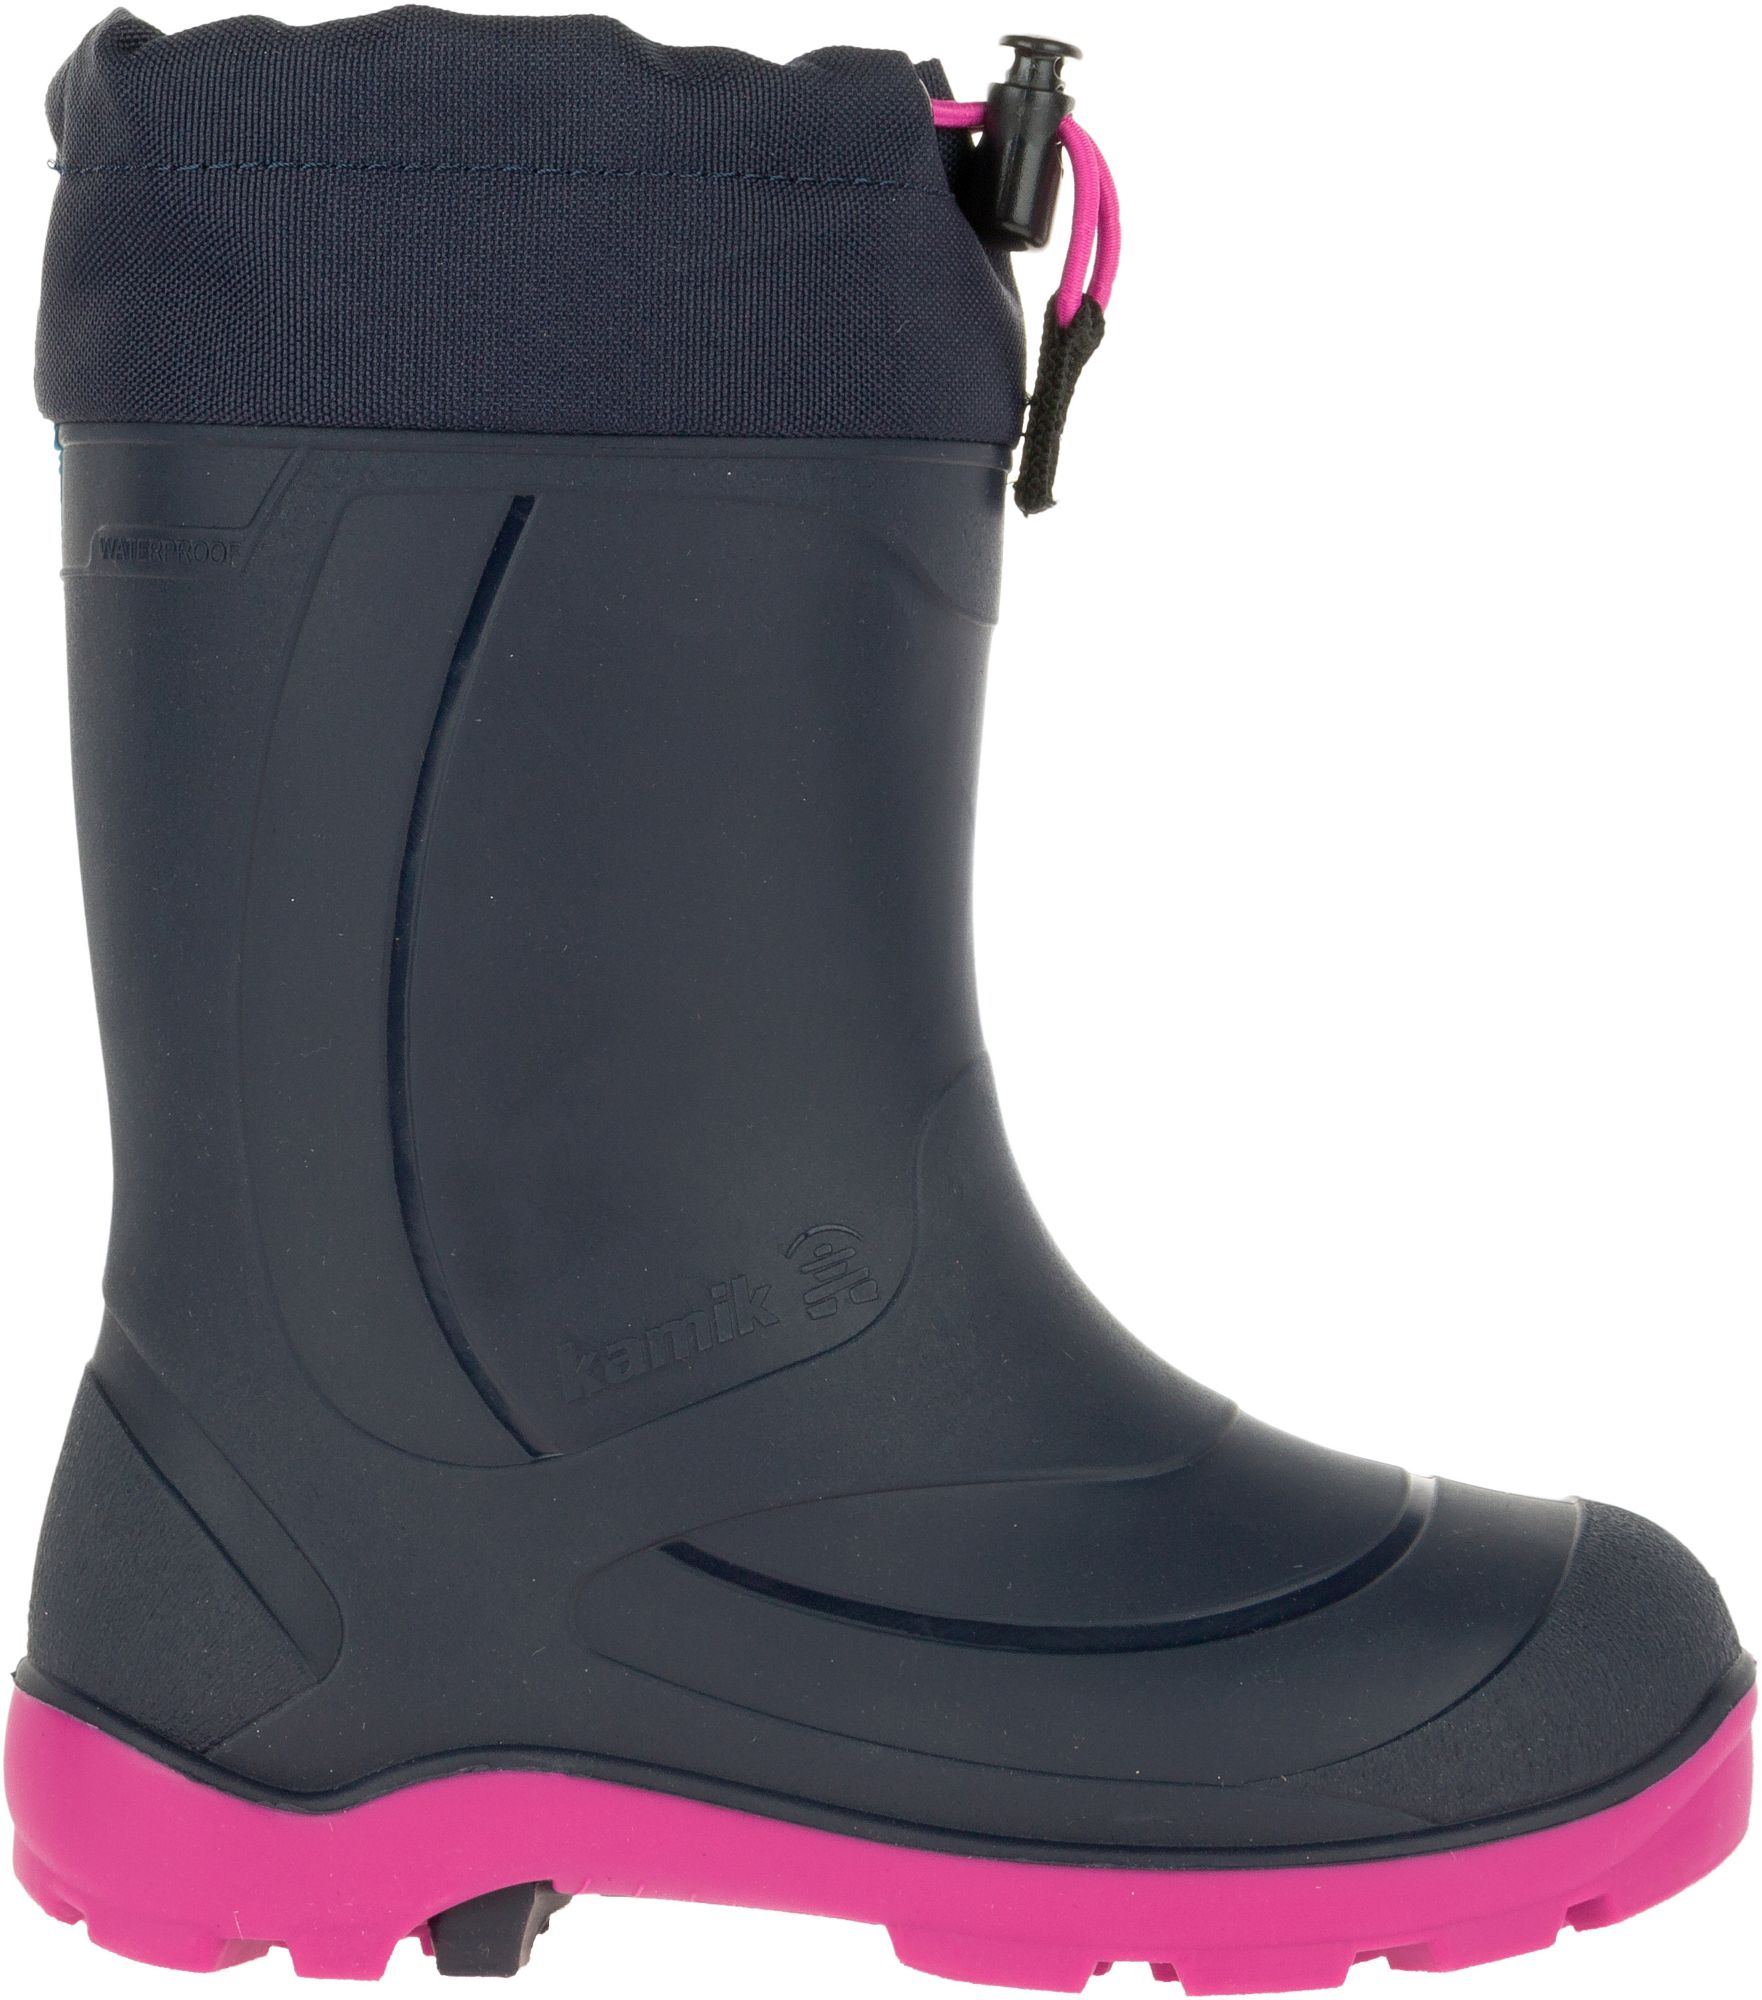 Insulated Waterproof Winter Boots 